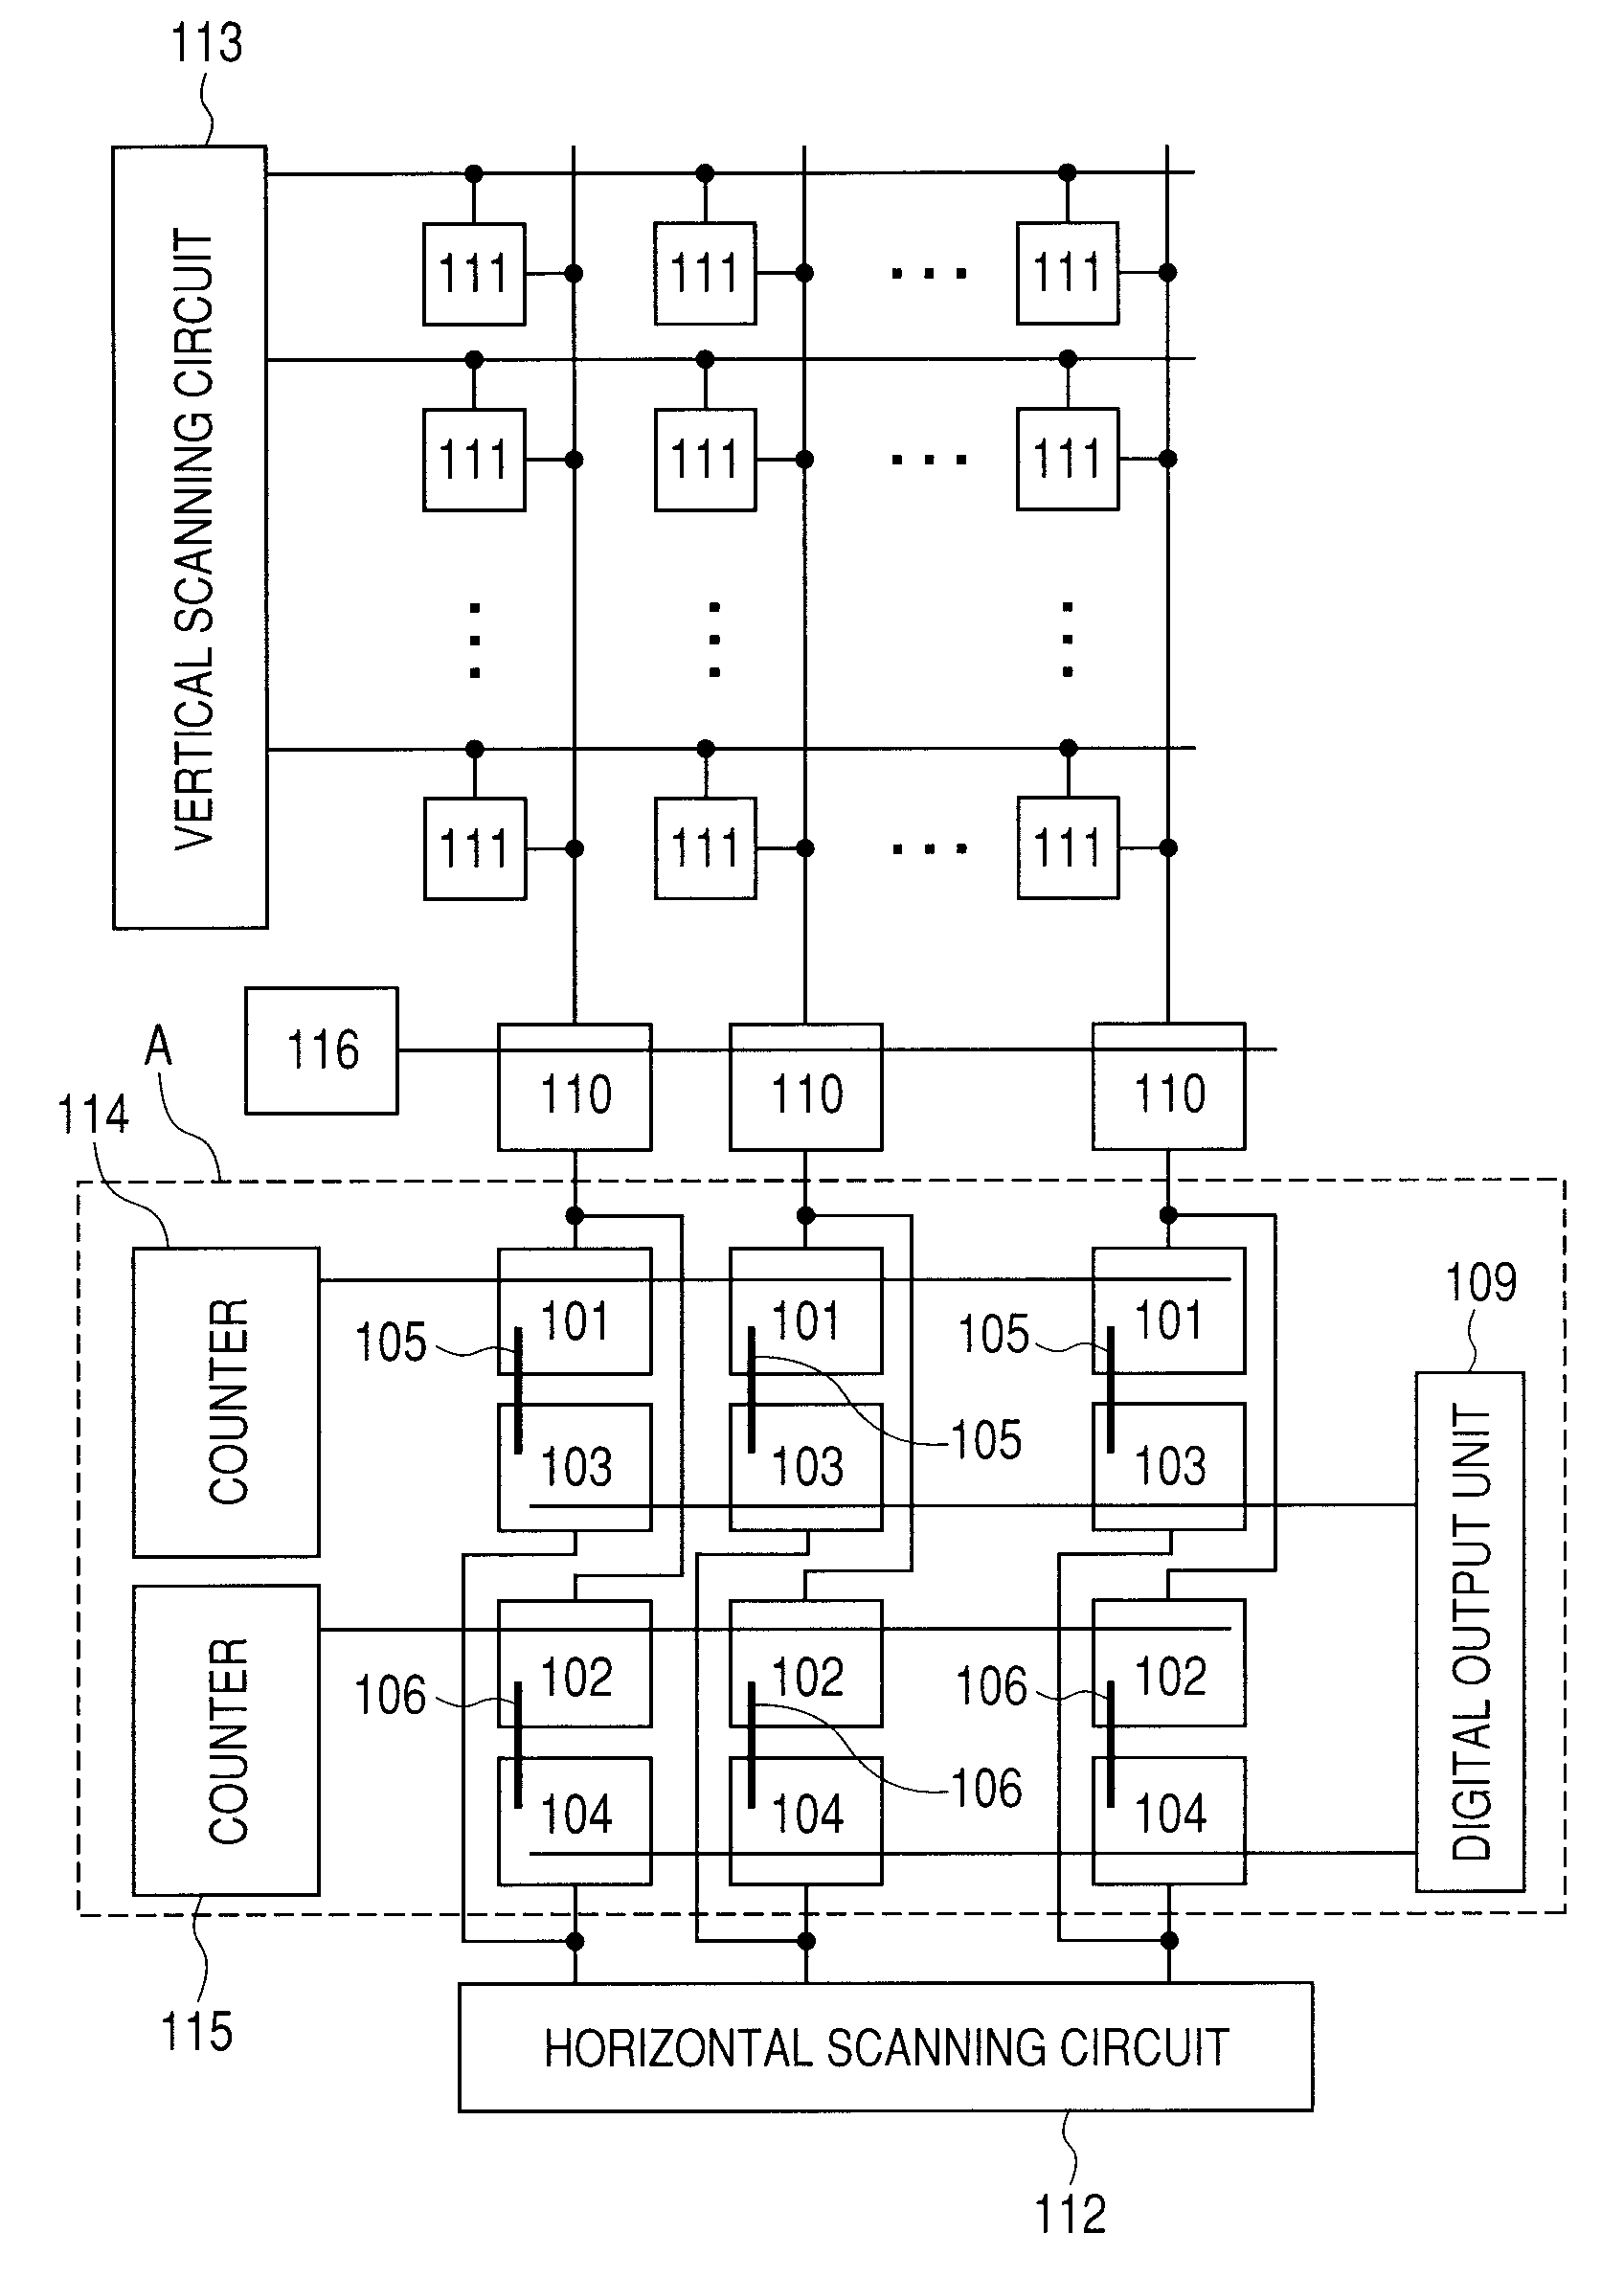 Solid-state imaging apparatus